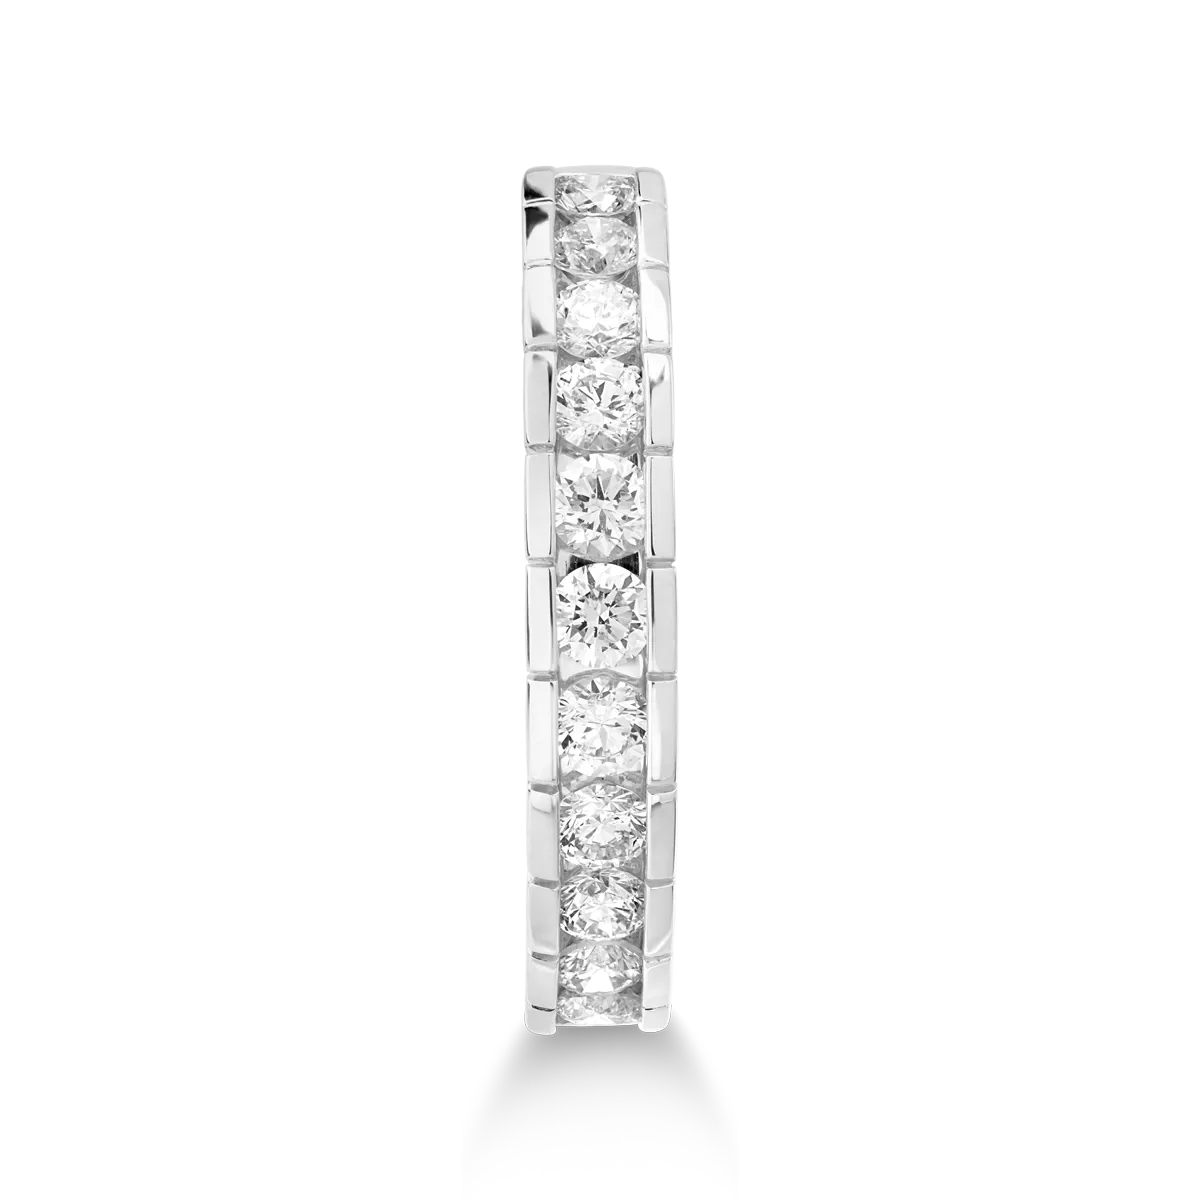 18K white gold ring with 0.5ct diamond